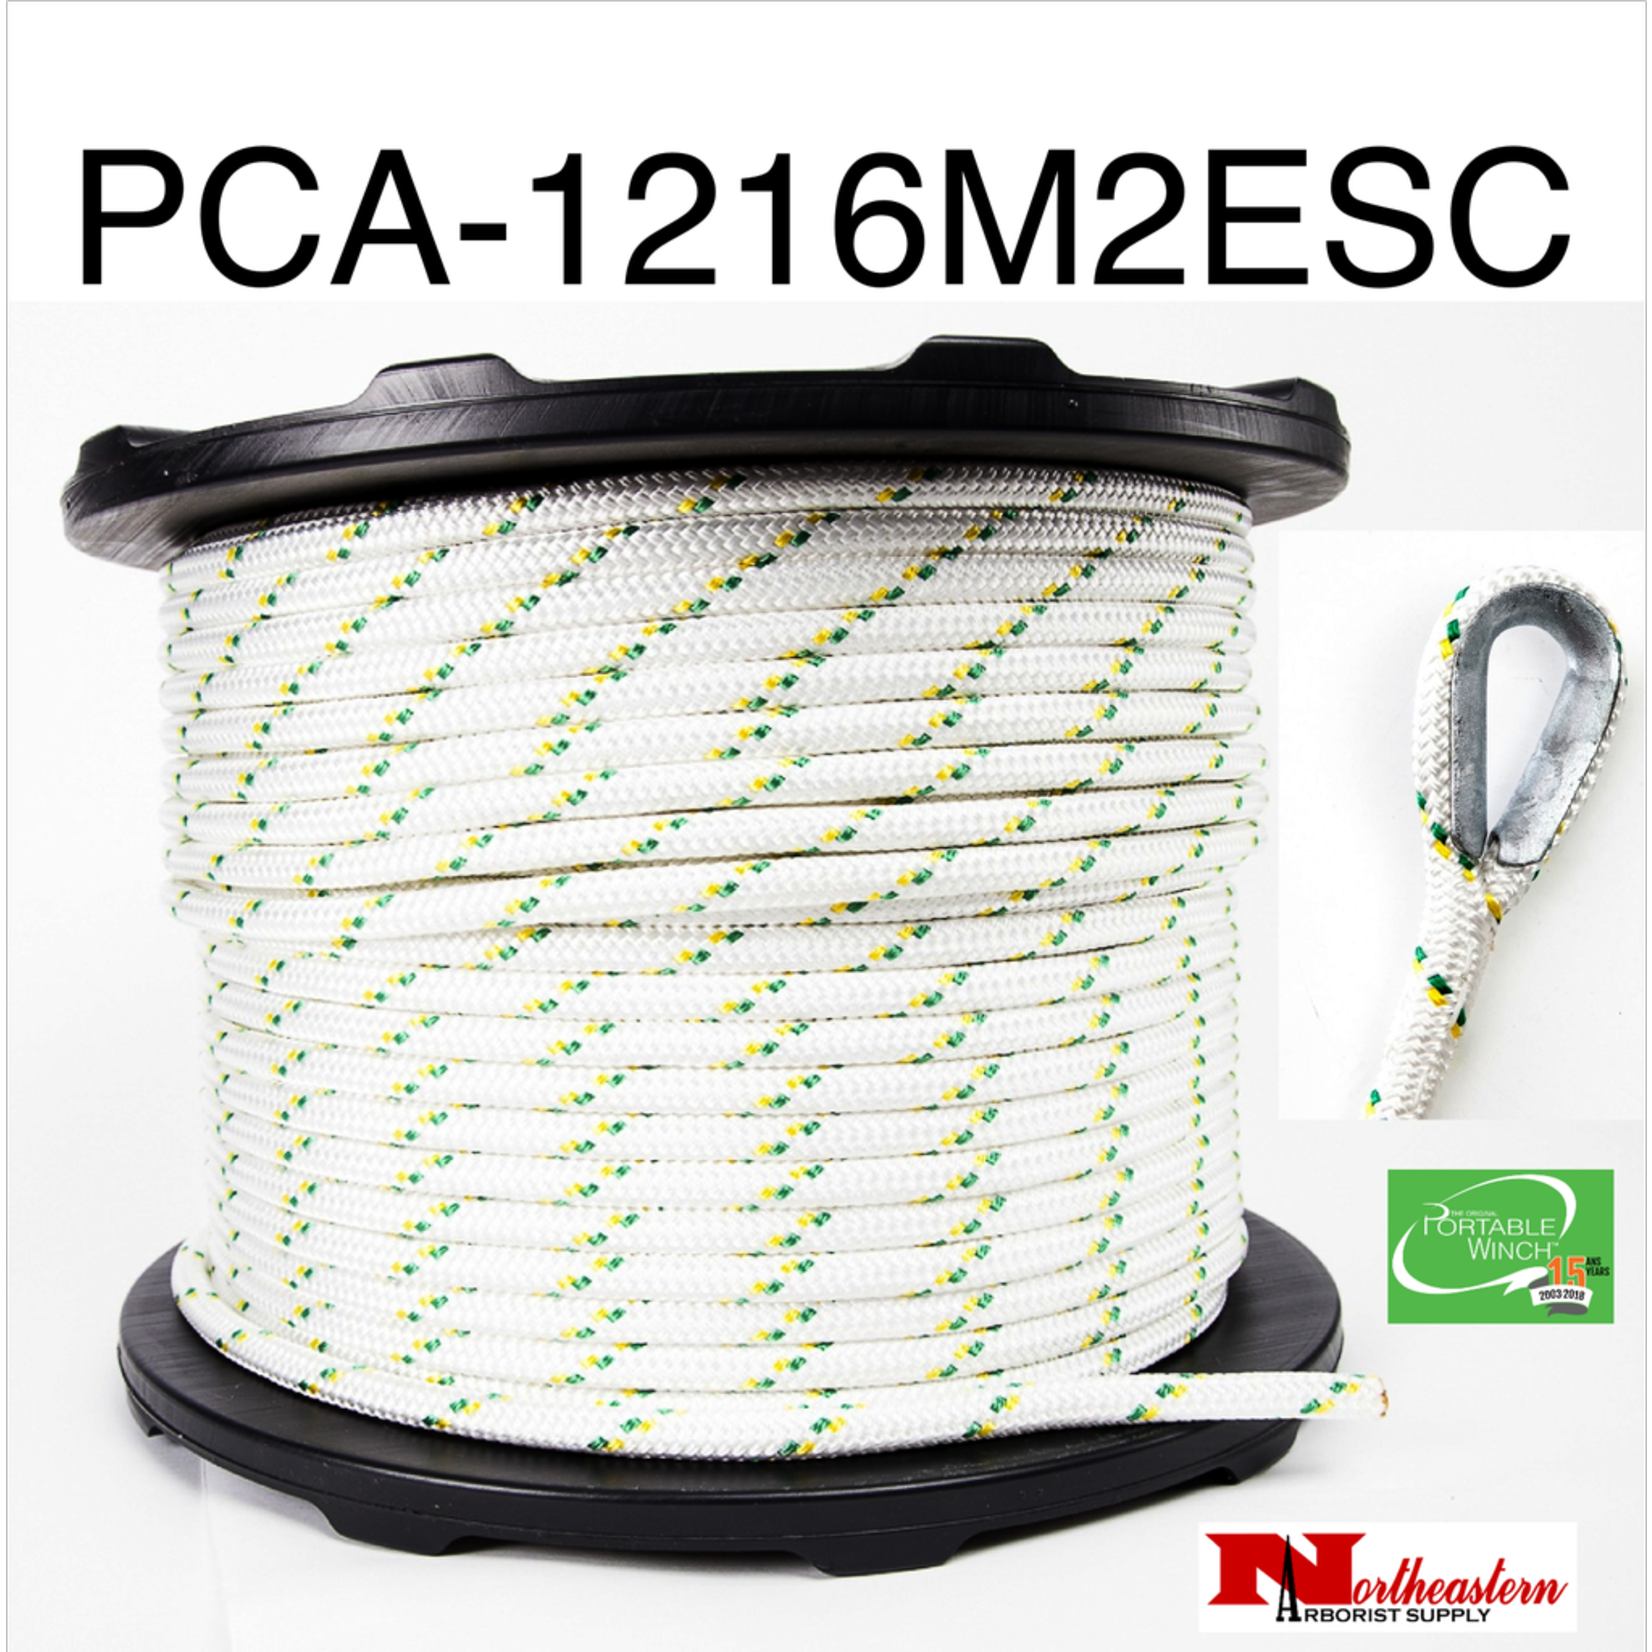 PORTABLE WINCH CO. Rope For Winch 1/2" X 656' with 2 Eye Splices & Thimbles (7275# MBS)